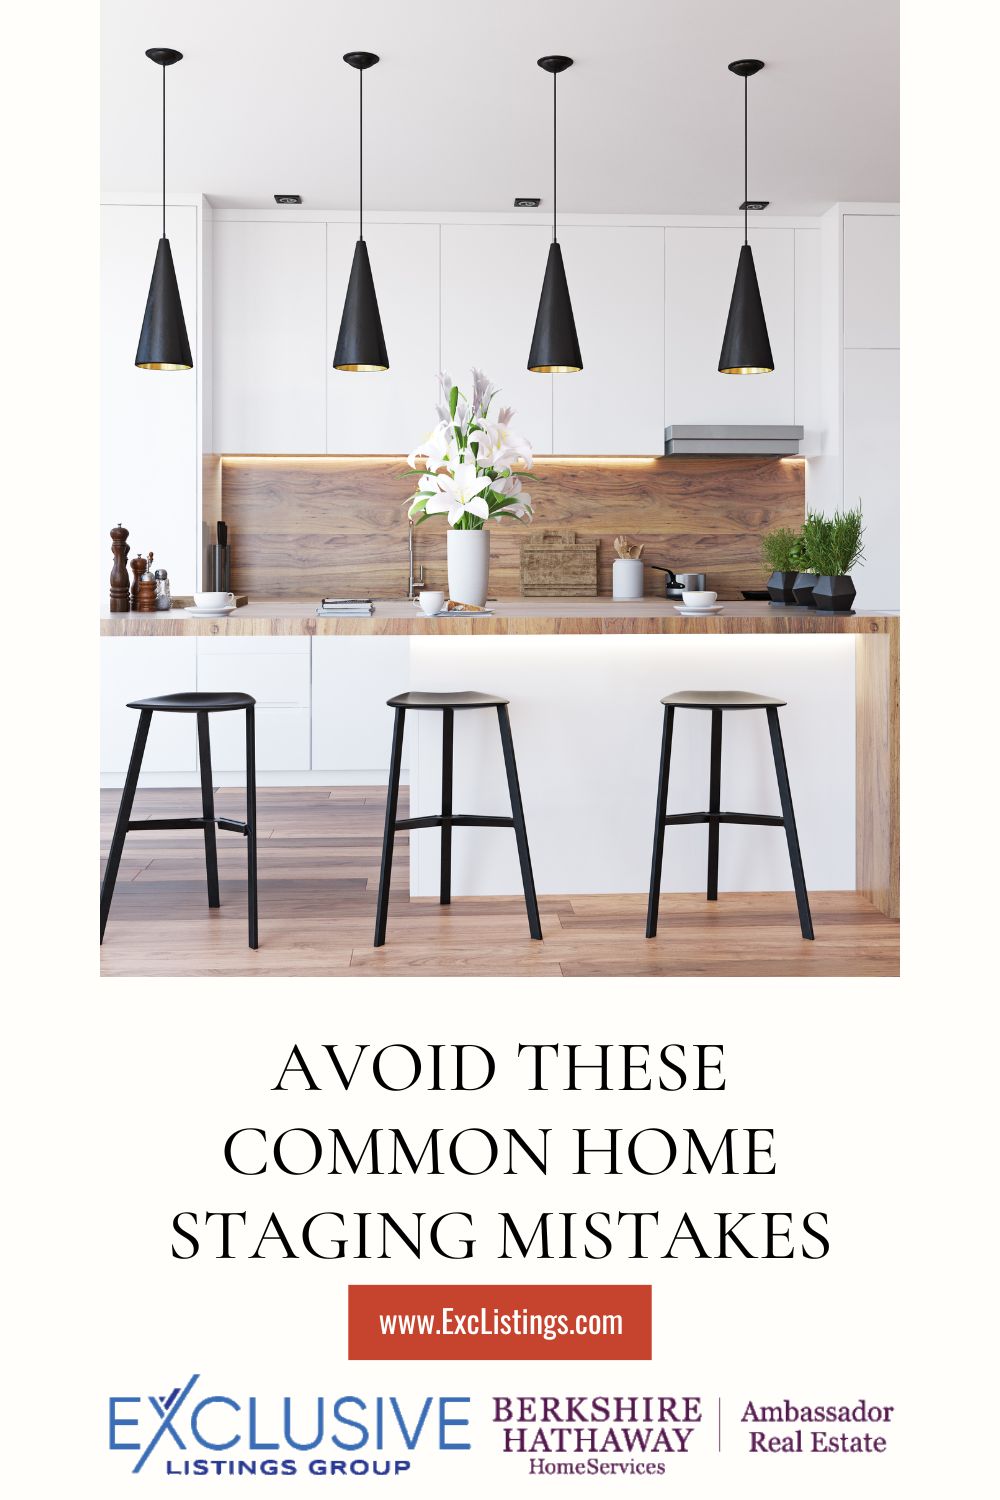 Home staging mistakes to avoid